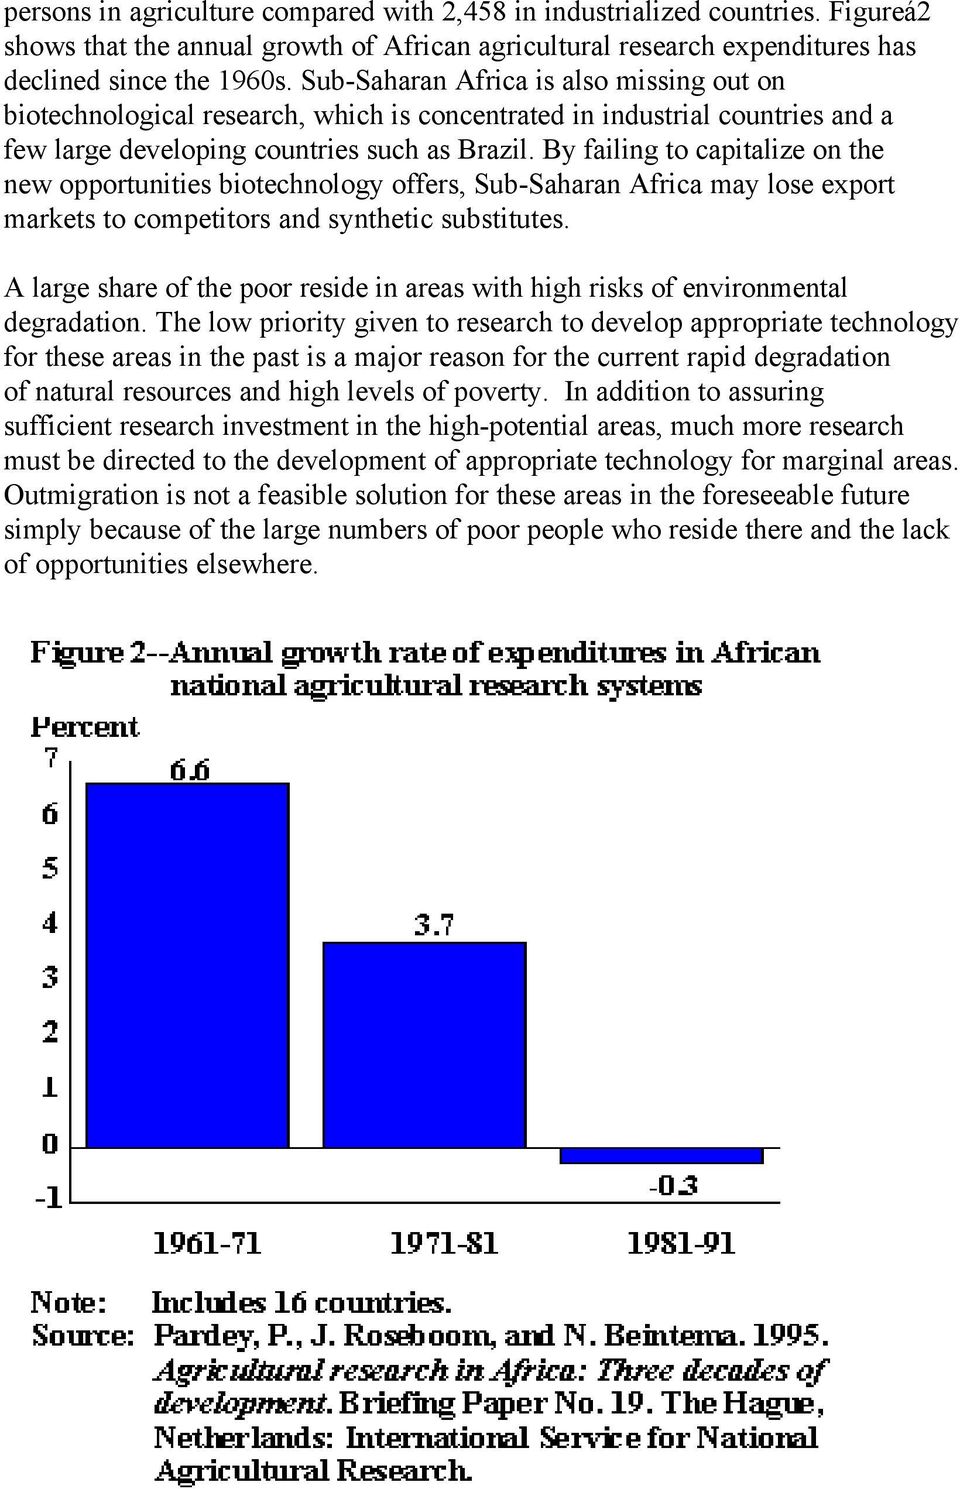 By failing to capitalize on the new opportunities biotechnology offers, Sub-Saharan Africa may lose export markets to competitors and synthetic substitutes.